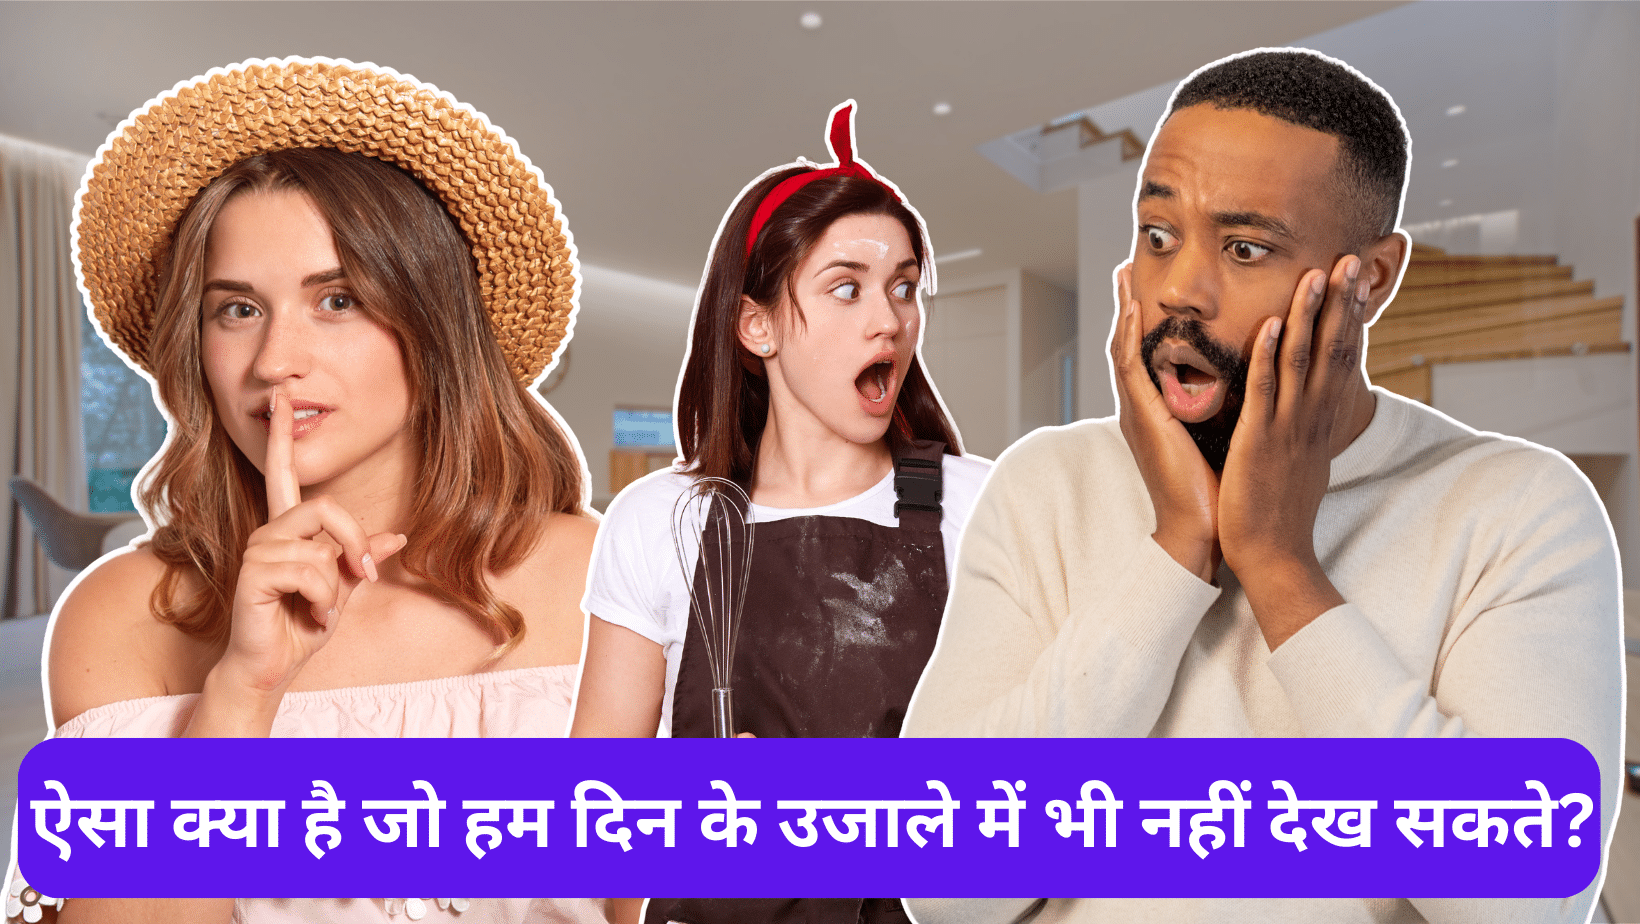 Best Funny Tricky Questions and Answers in Hindi